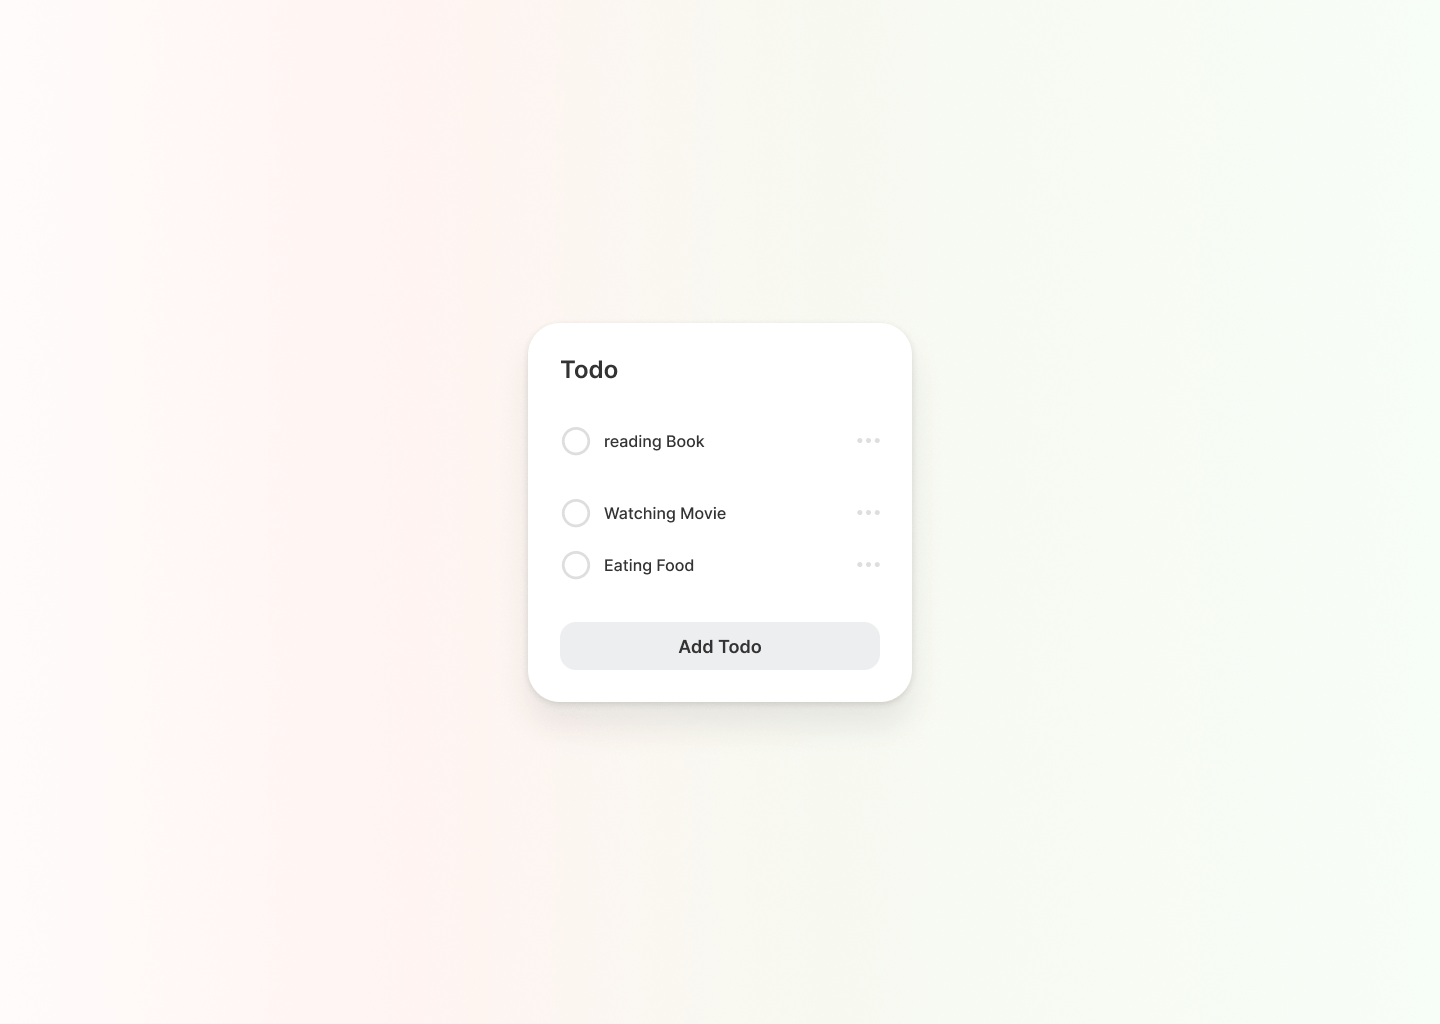 Build A To-do list Using React JS Mini Project | useState Hook & Conditionals